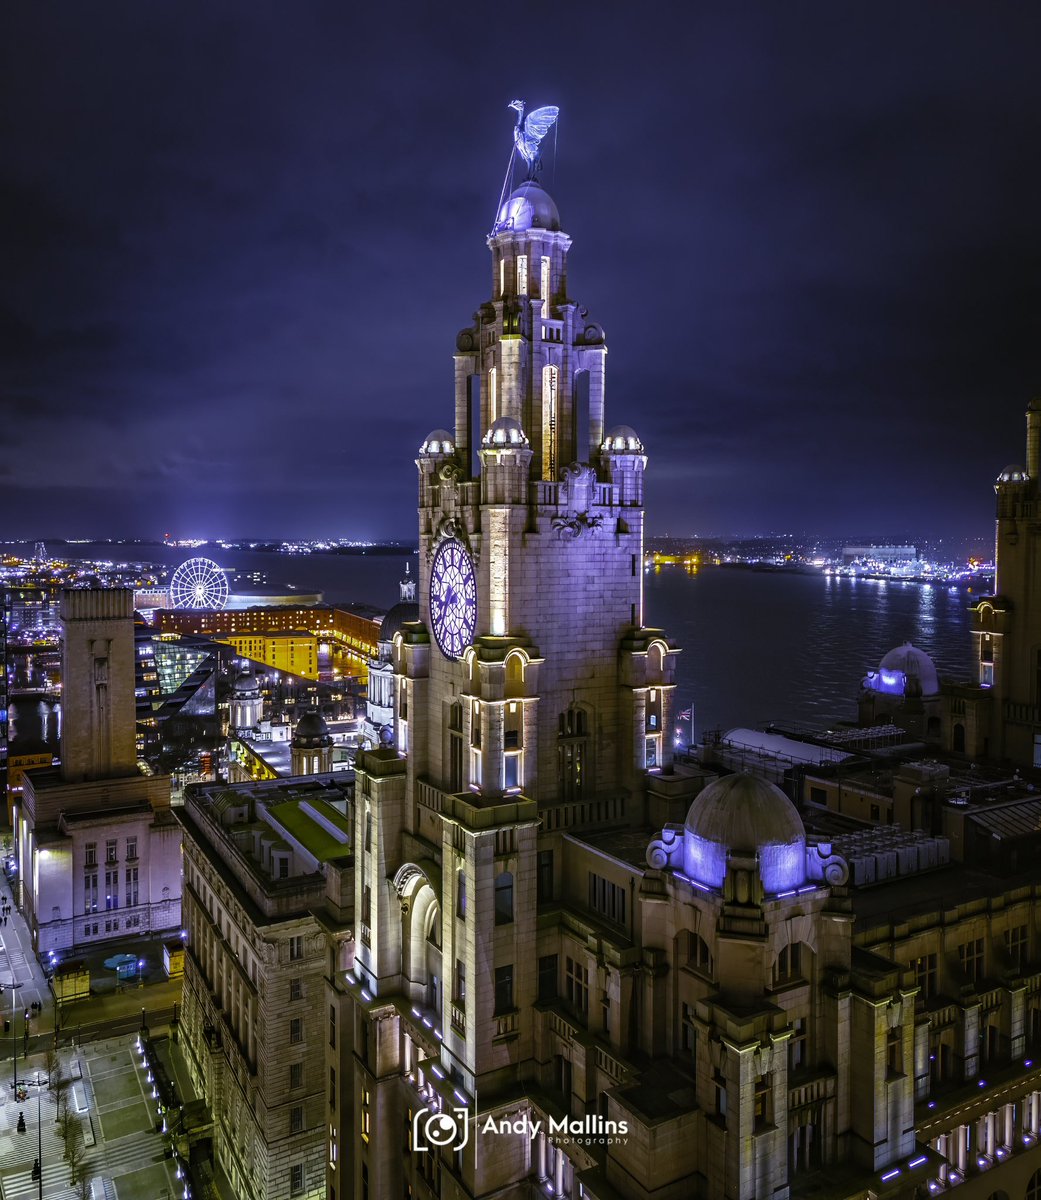 The Royal Liver Building and beyond 🌃 #liverpool